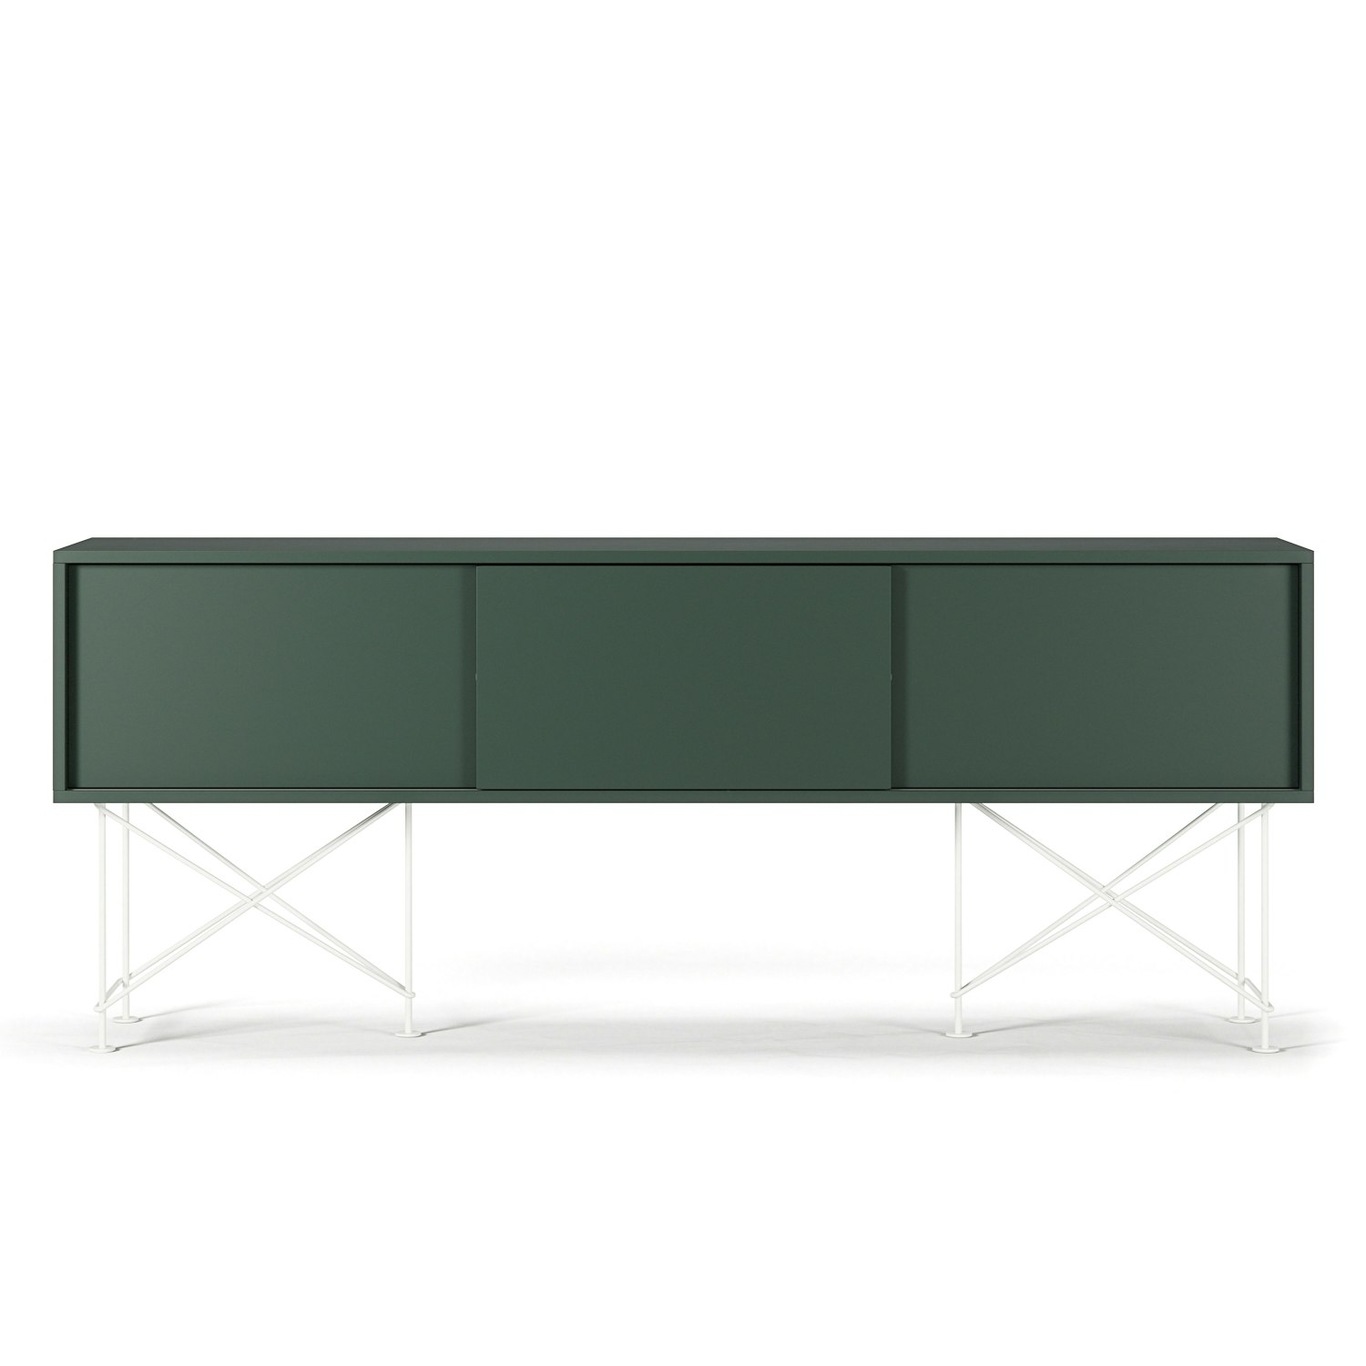 Vogue Media Bench With Stand 180 cm, Green / White